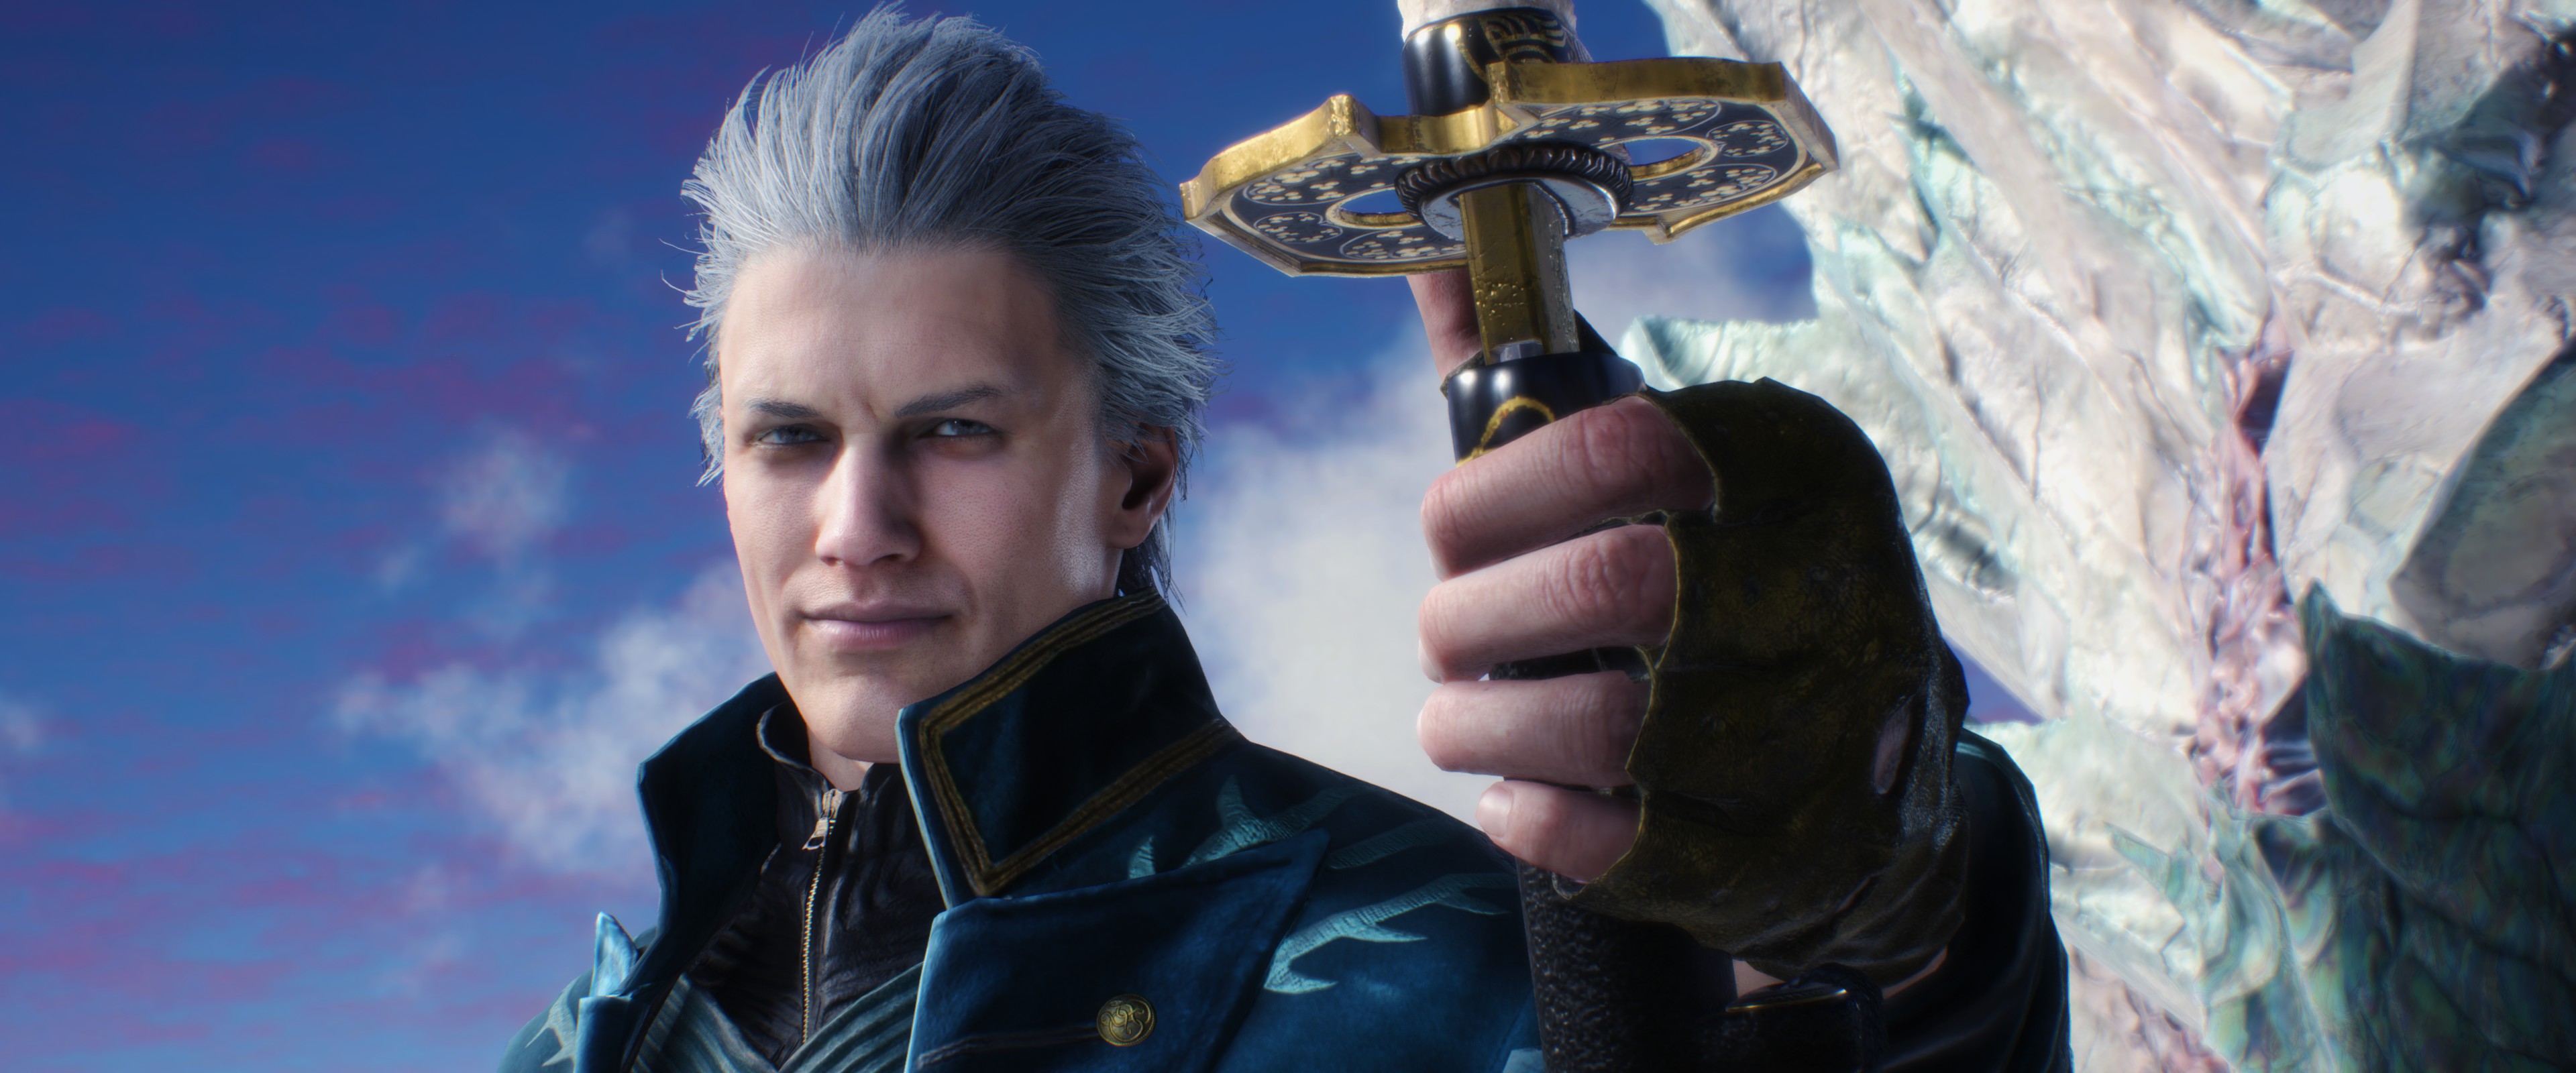 vergil (devil may cry), devil may cry 5, video game, devil may cry